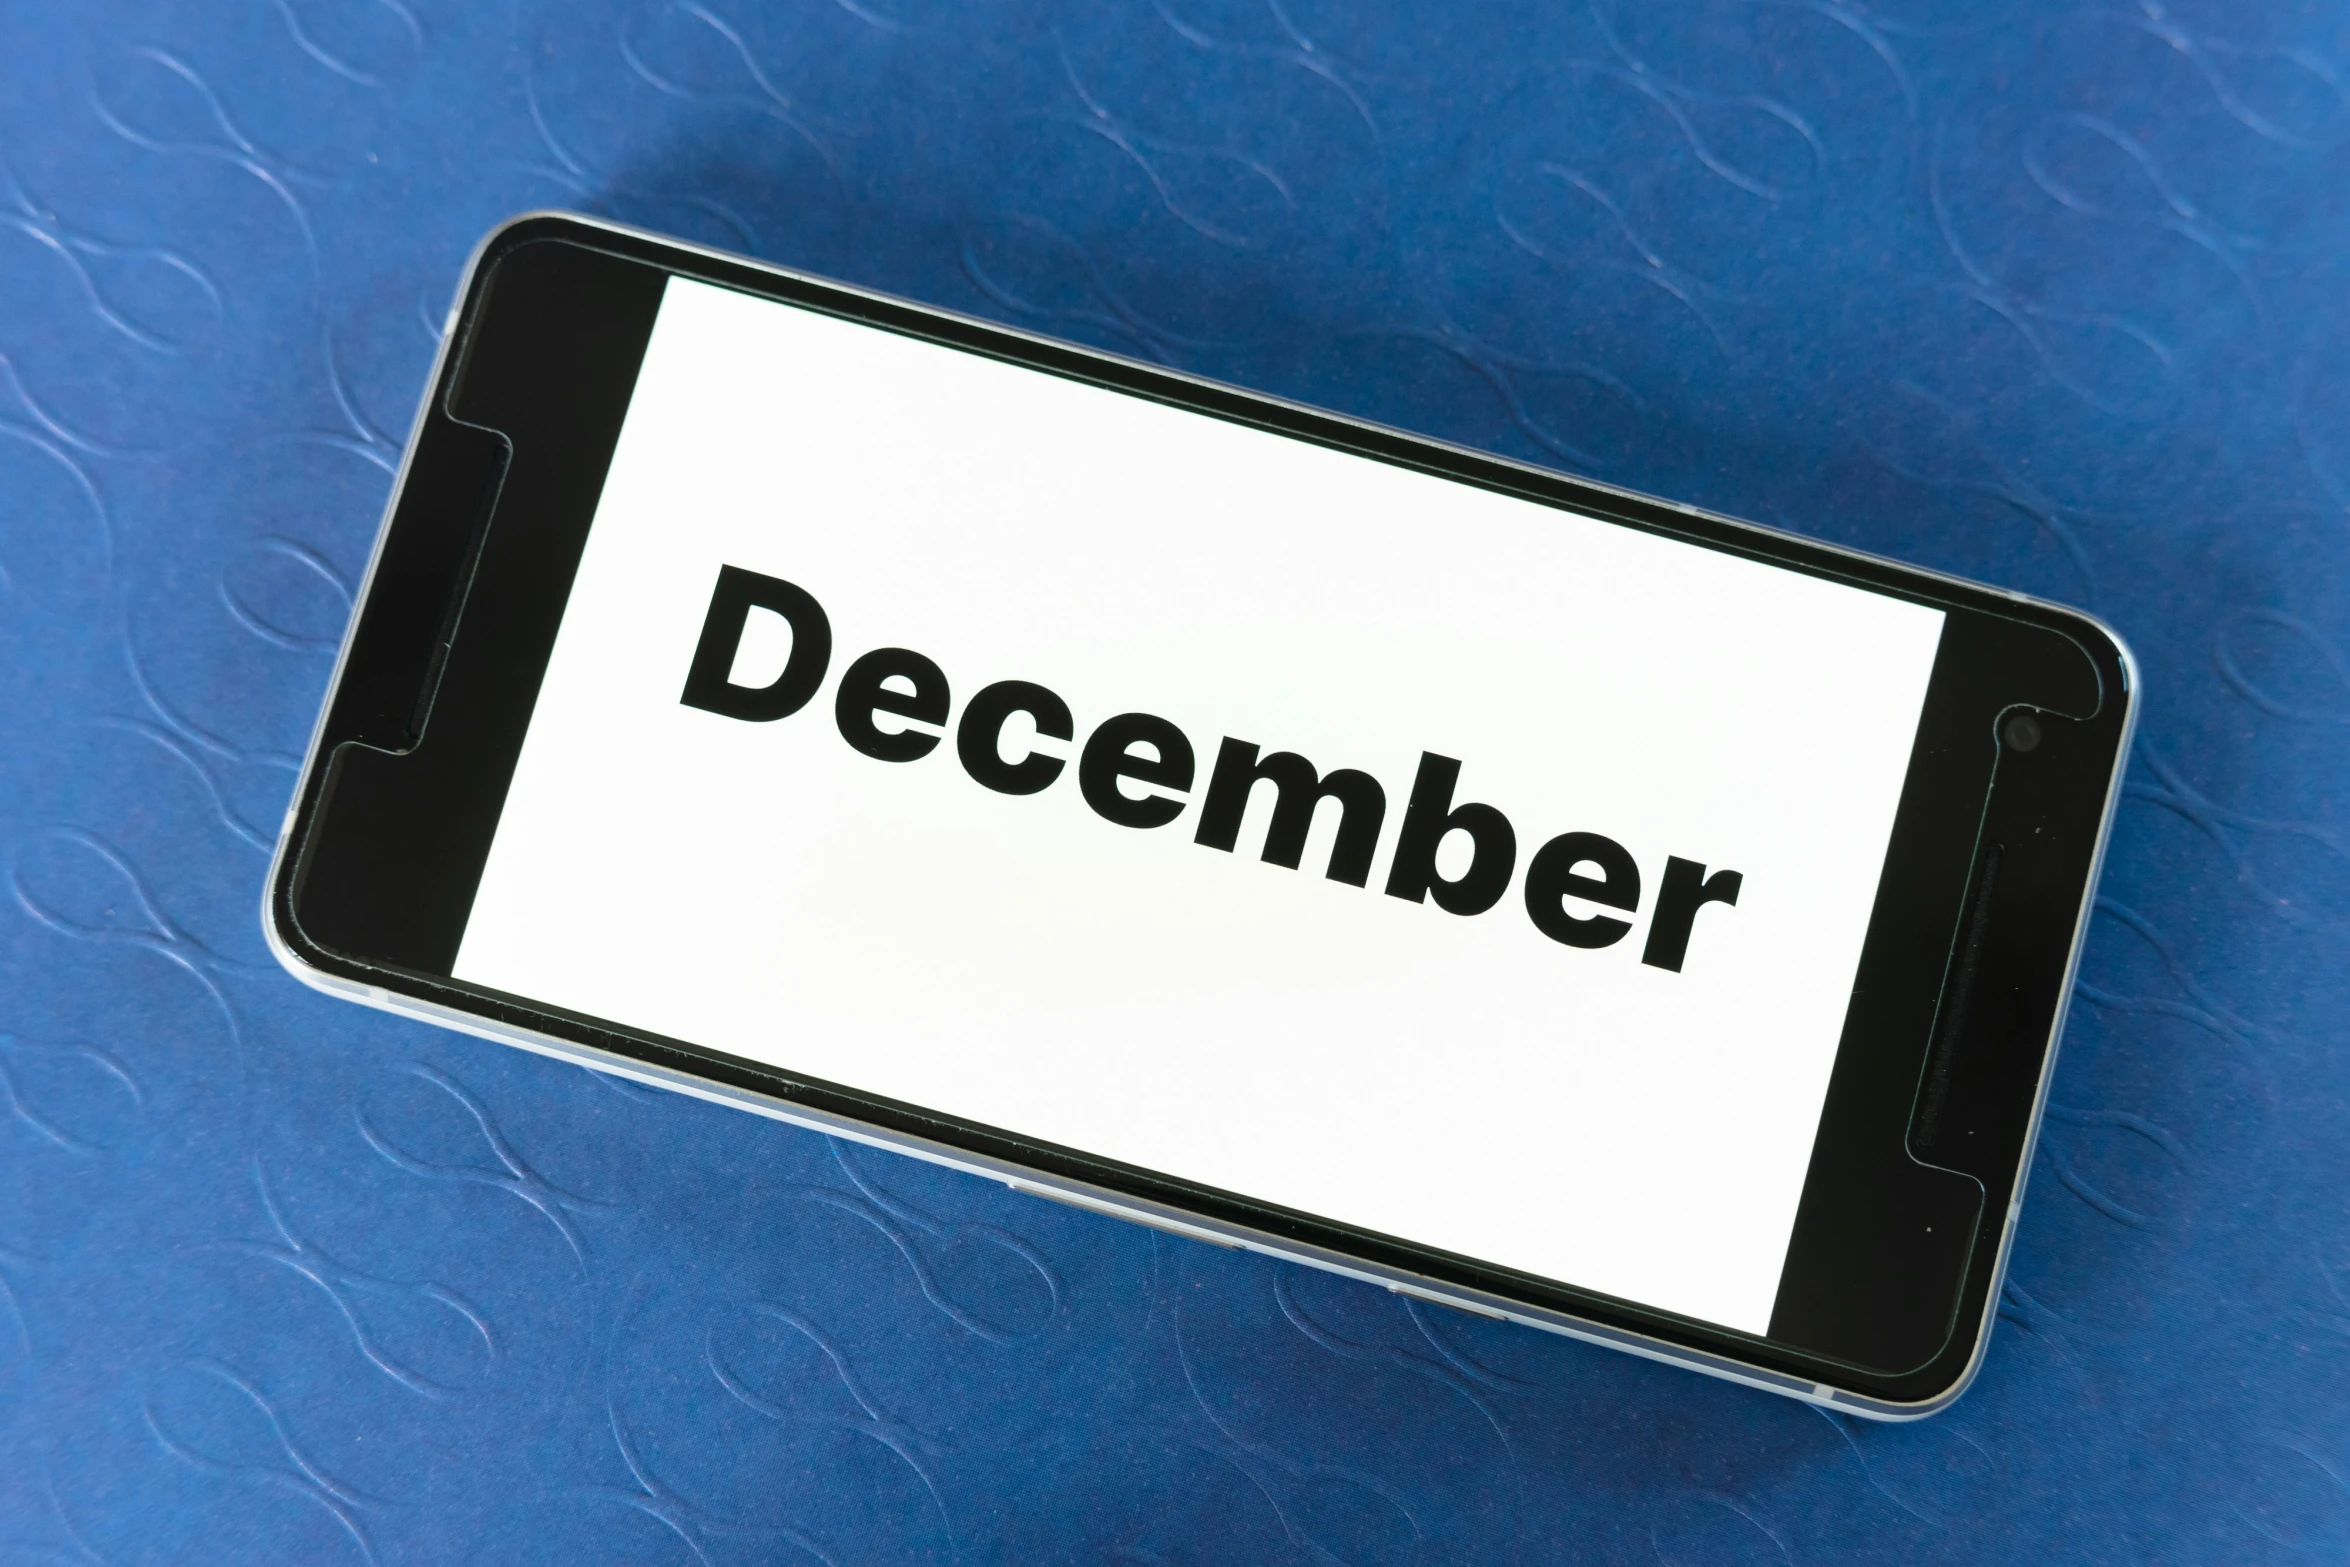 an iphone is shown with the word december written on the screen